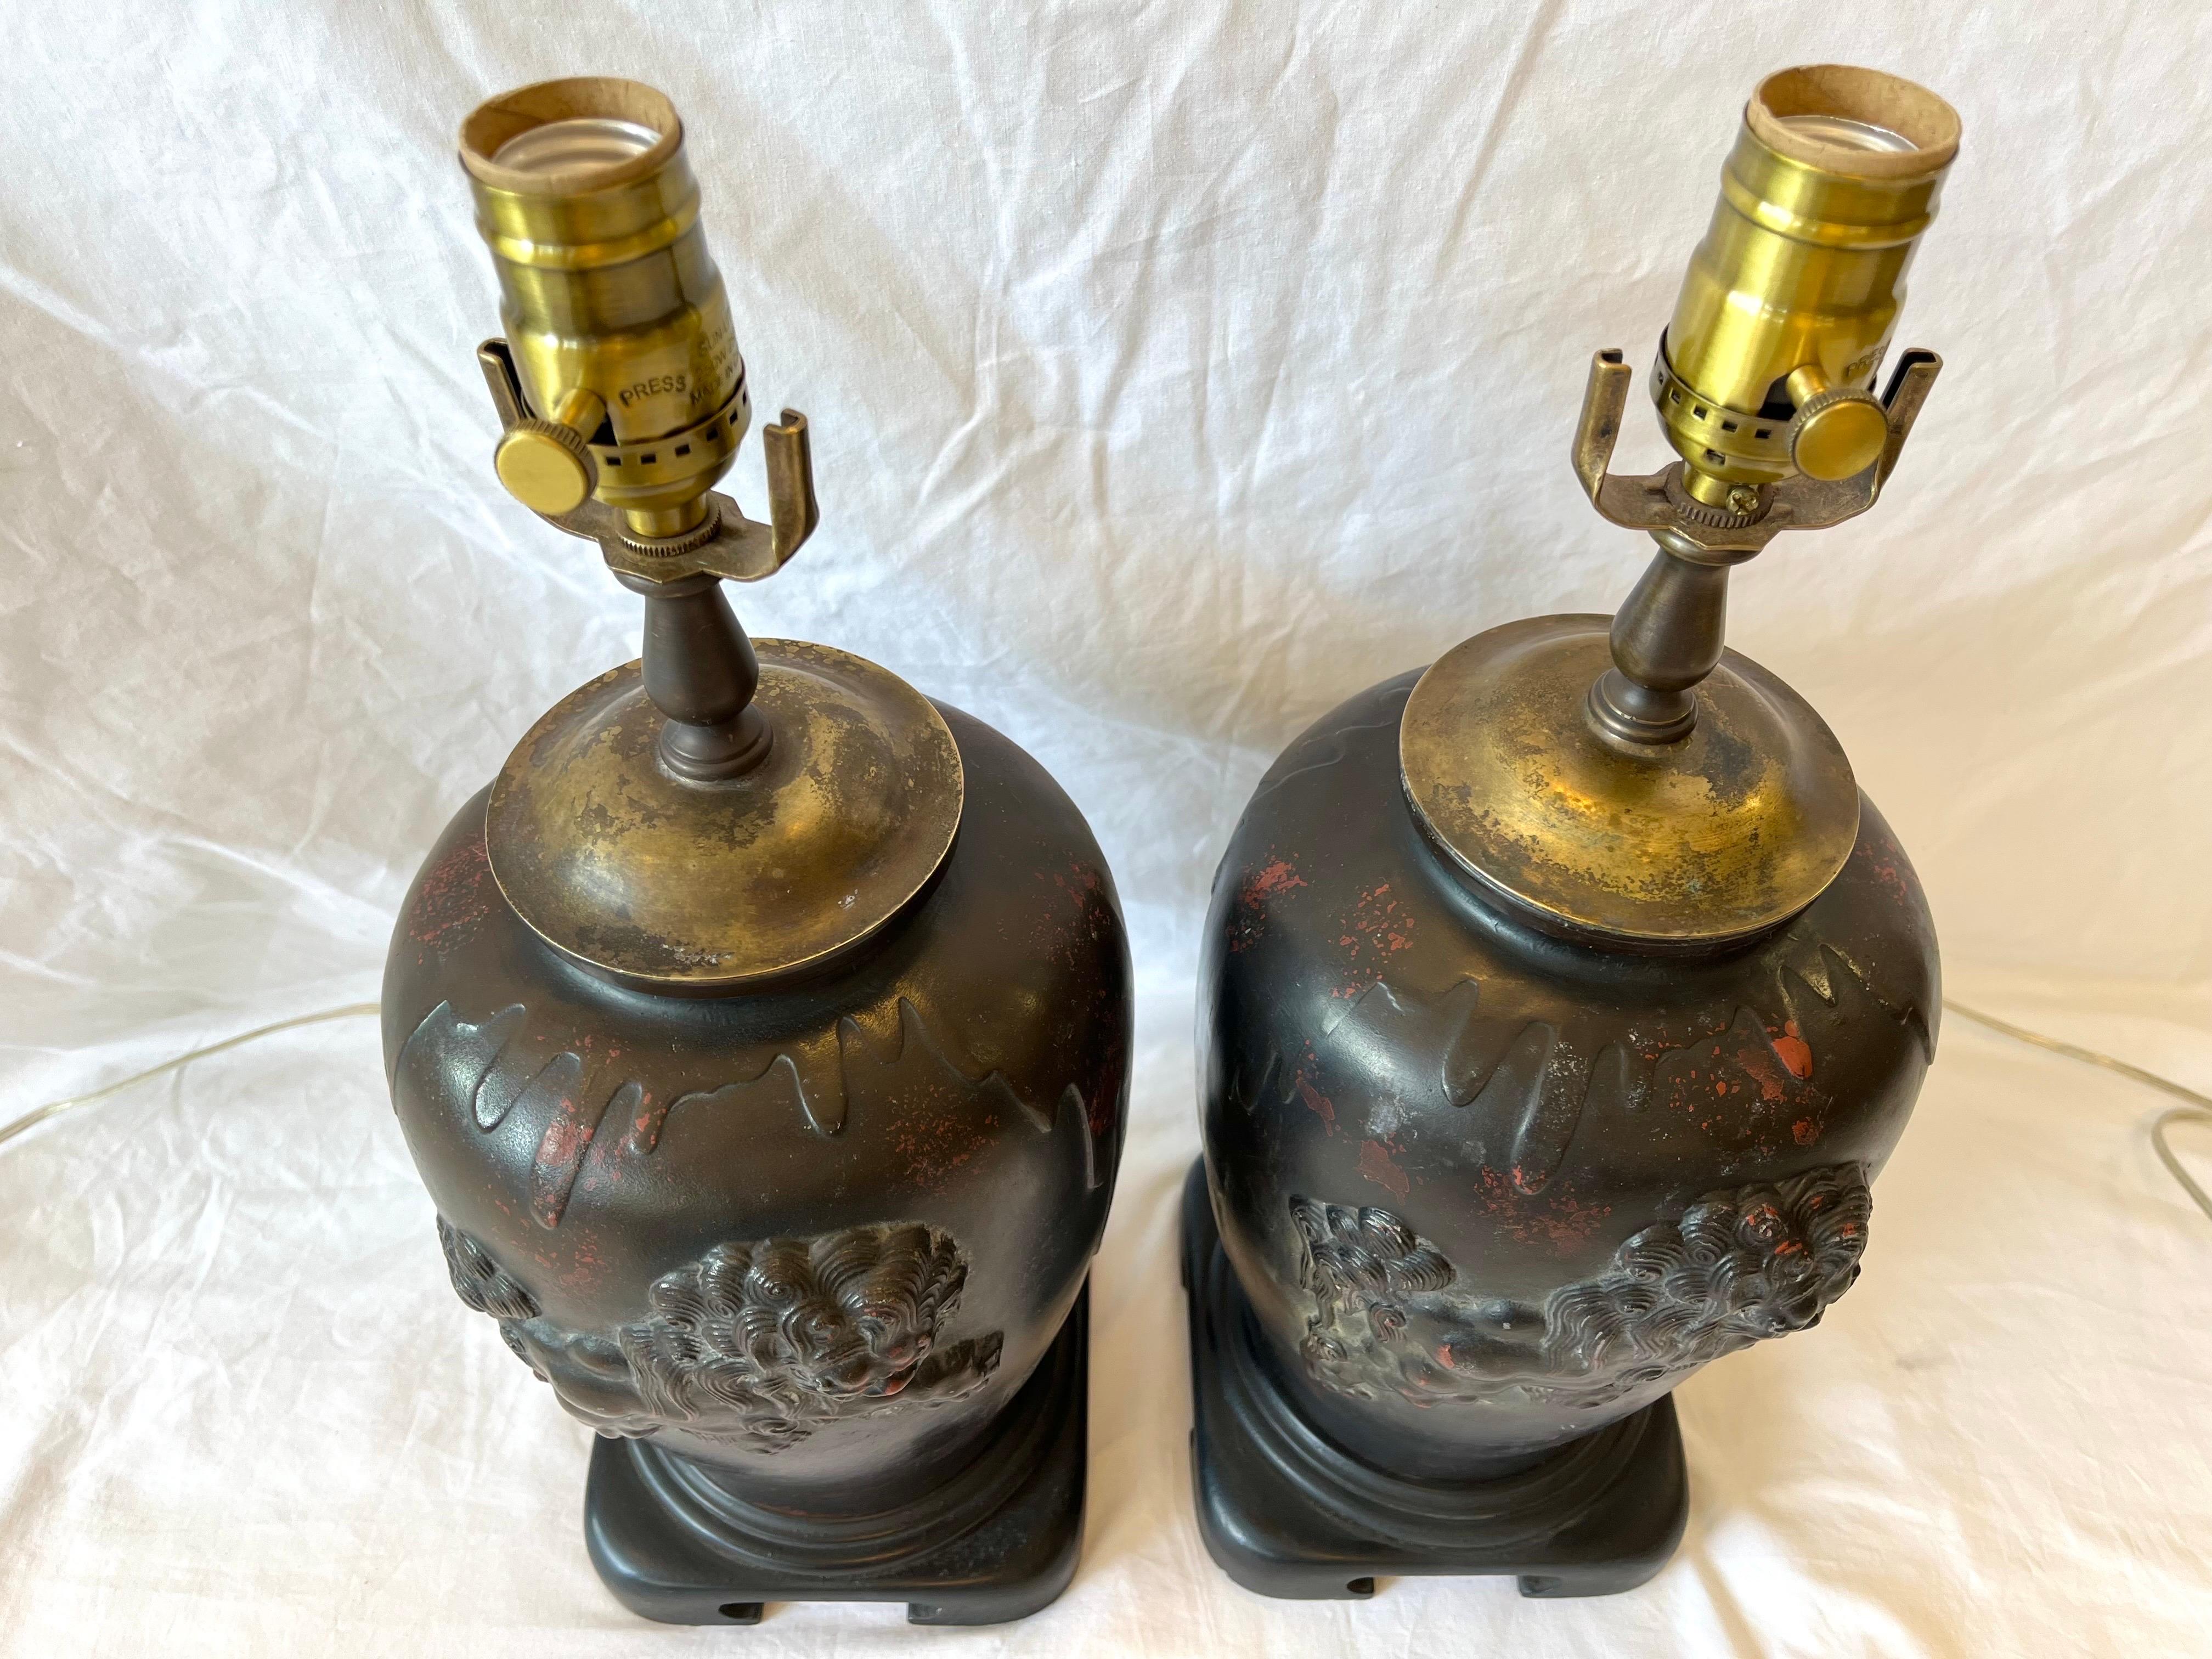 A vintage pair of signed Asian lamps with lionized Shih Tzus or Foo Dogs in a beautifully detailed high relief on the ginger jar shaped form. Each of the lamps is adorned with a leaping Foo Dog against a patinated bronze finished ground with touches